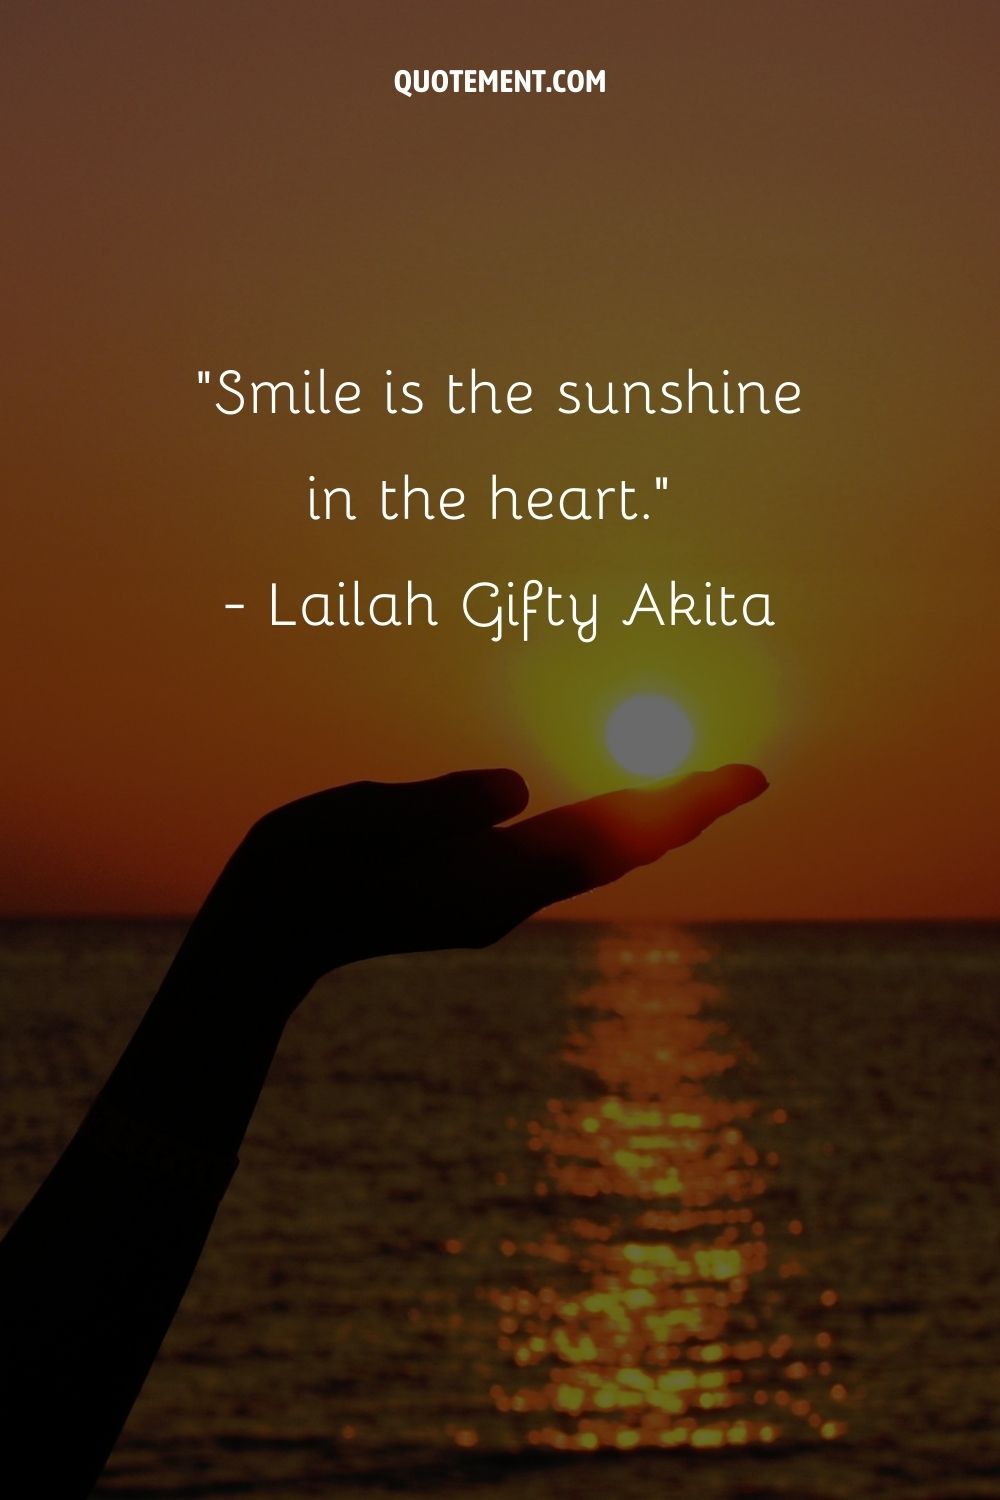 Smile is the sunshine in the heart